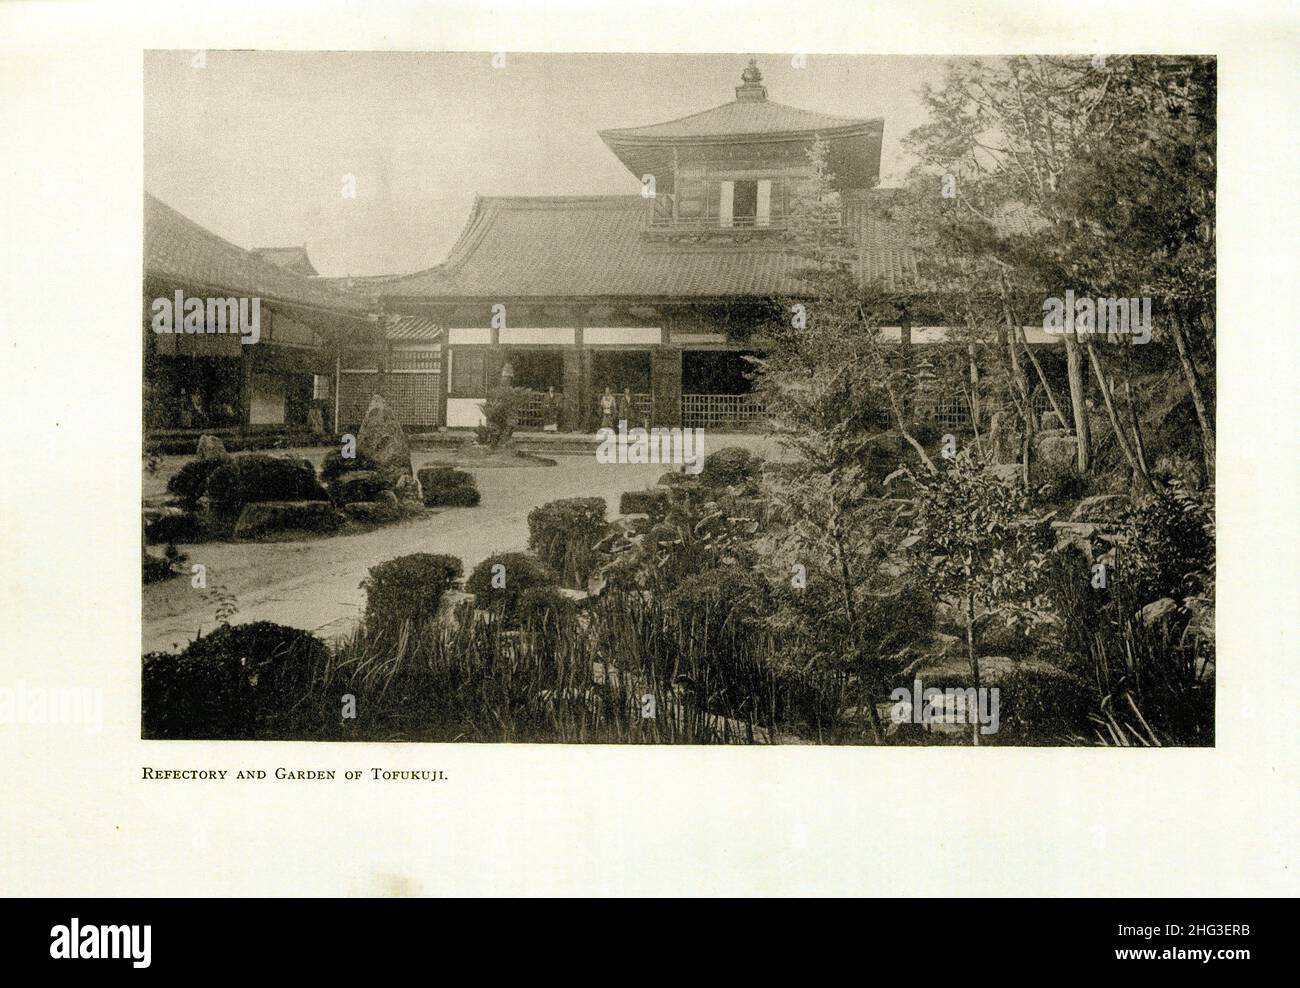 Archival photo of refectory and garden of Tofukuji temple. Japan  Reproduction of book illustration of 1912 Tofuku-ji (東福寺) is a Buddhist temple in Hi Stock Photo